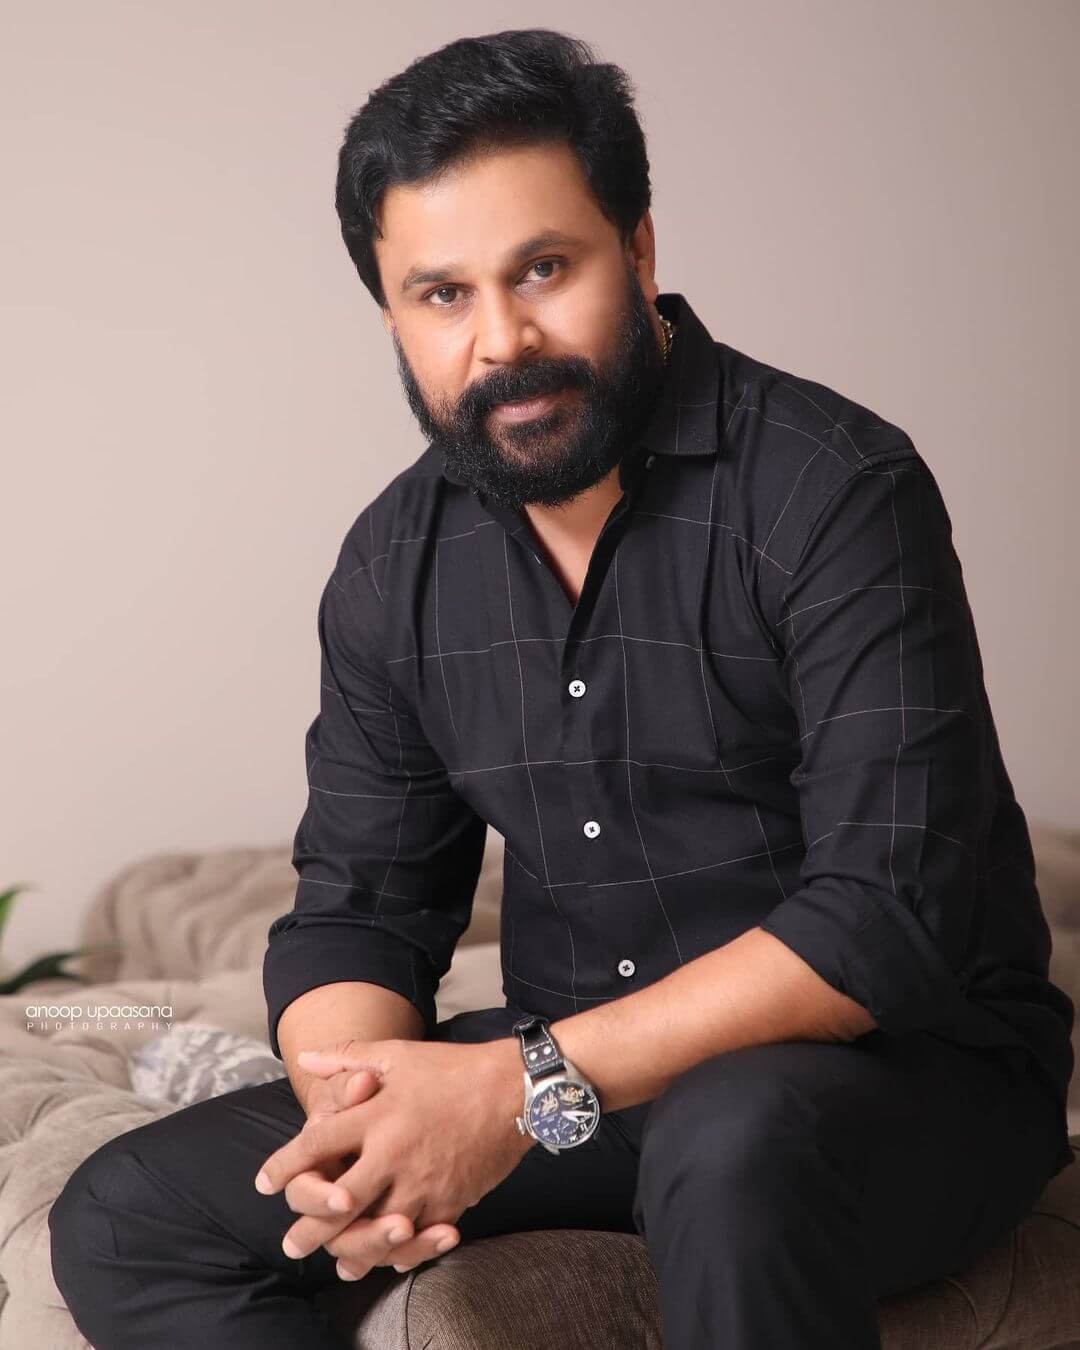 Actor Dileep in black outfit